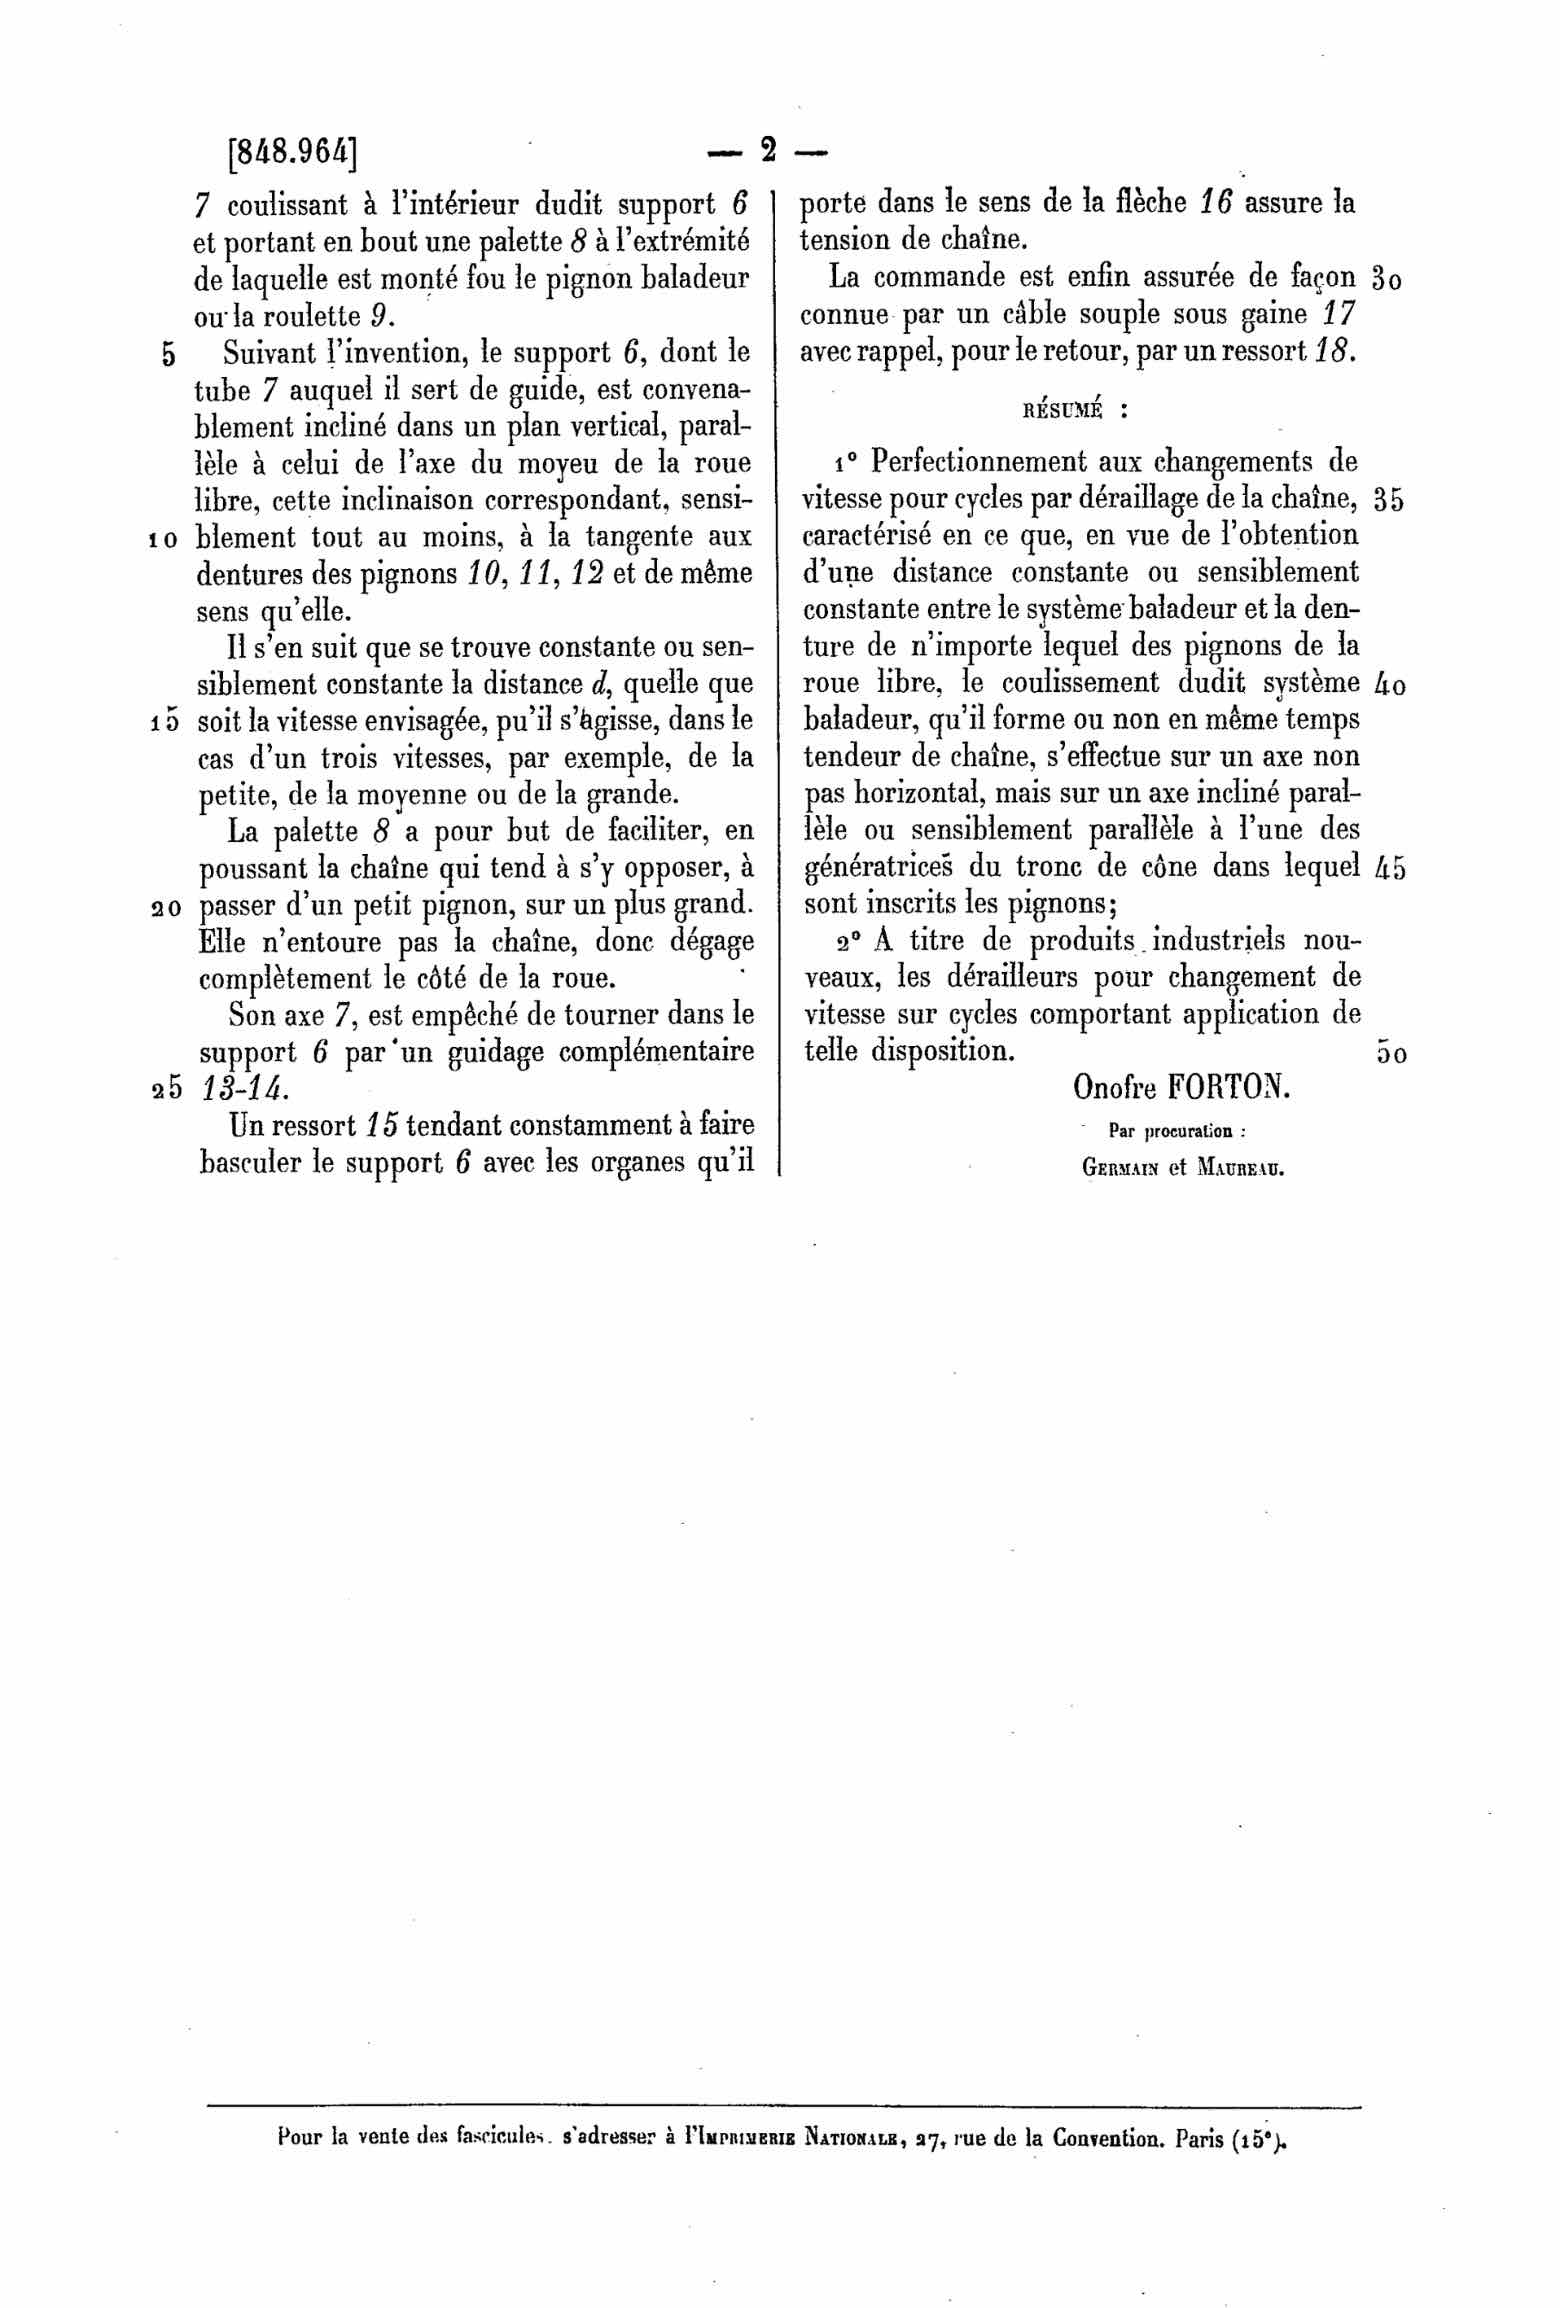 French Patent 848,964 - Ideal scan 2 main image